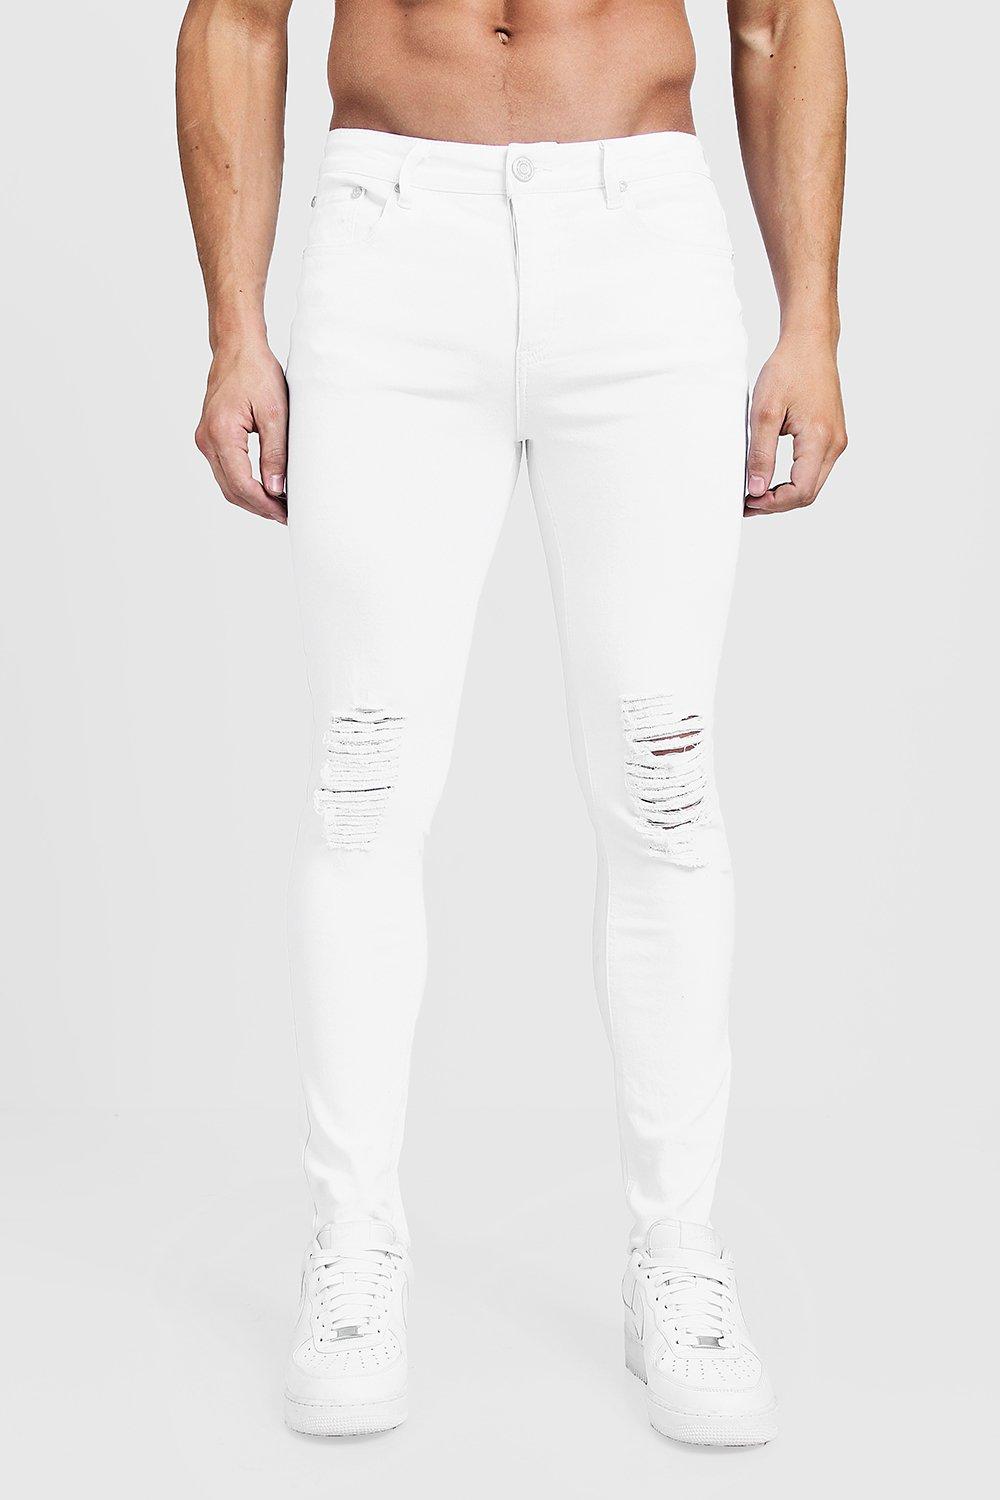 white skinny jeans with holes